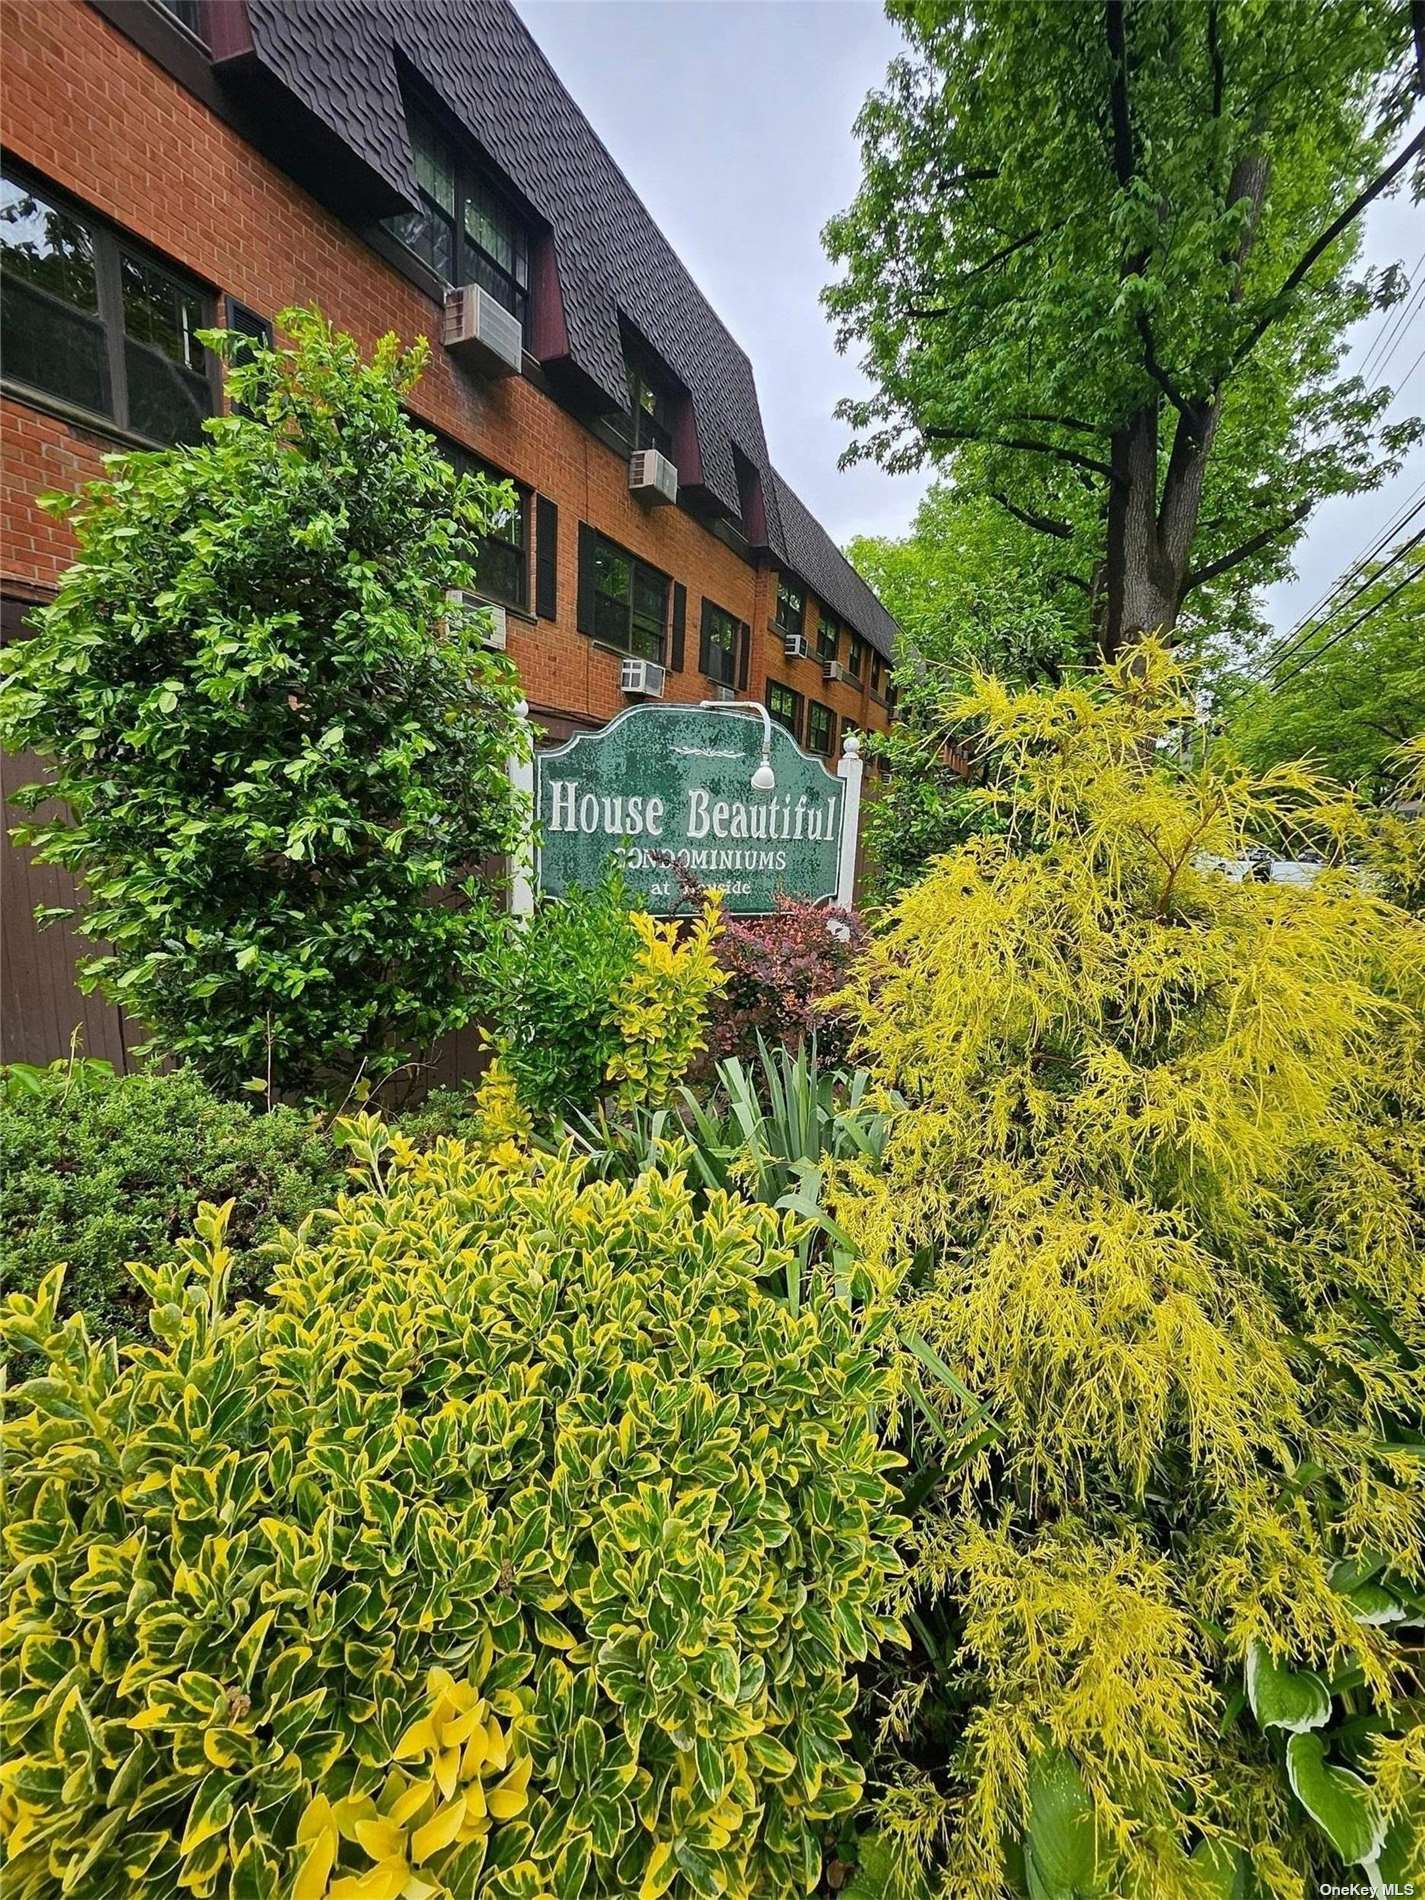 a yellow building with trees in front of it